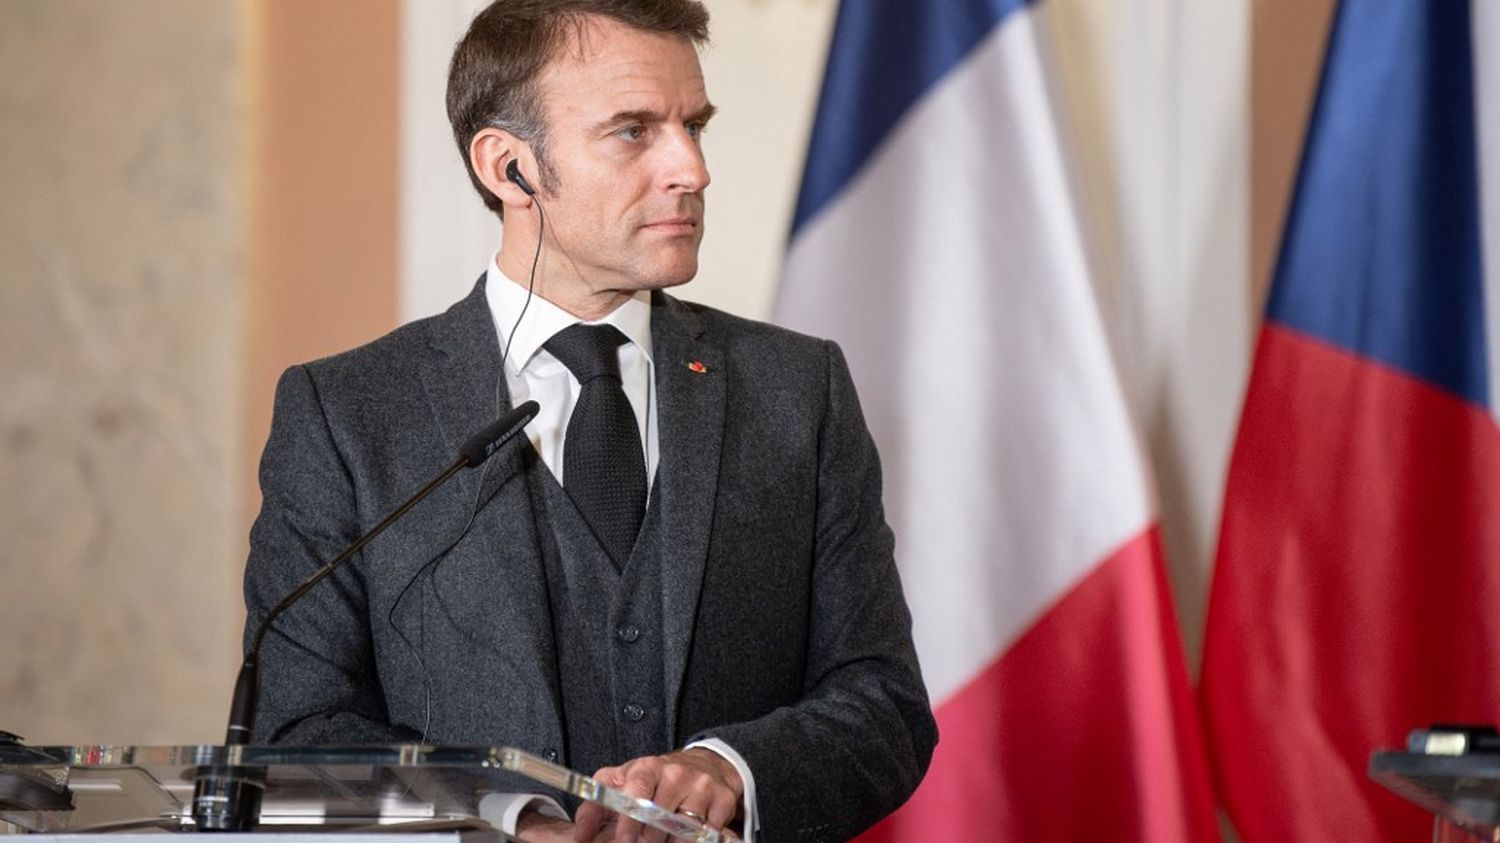 Emmanuel Macron will launch the D-Day commemoration on April 16 in Vercors